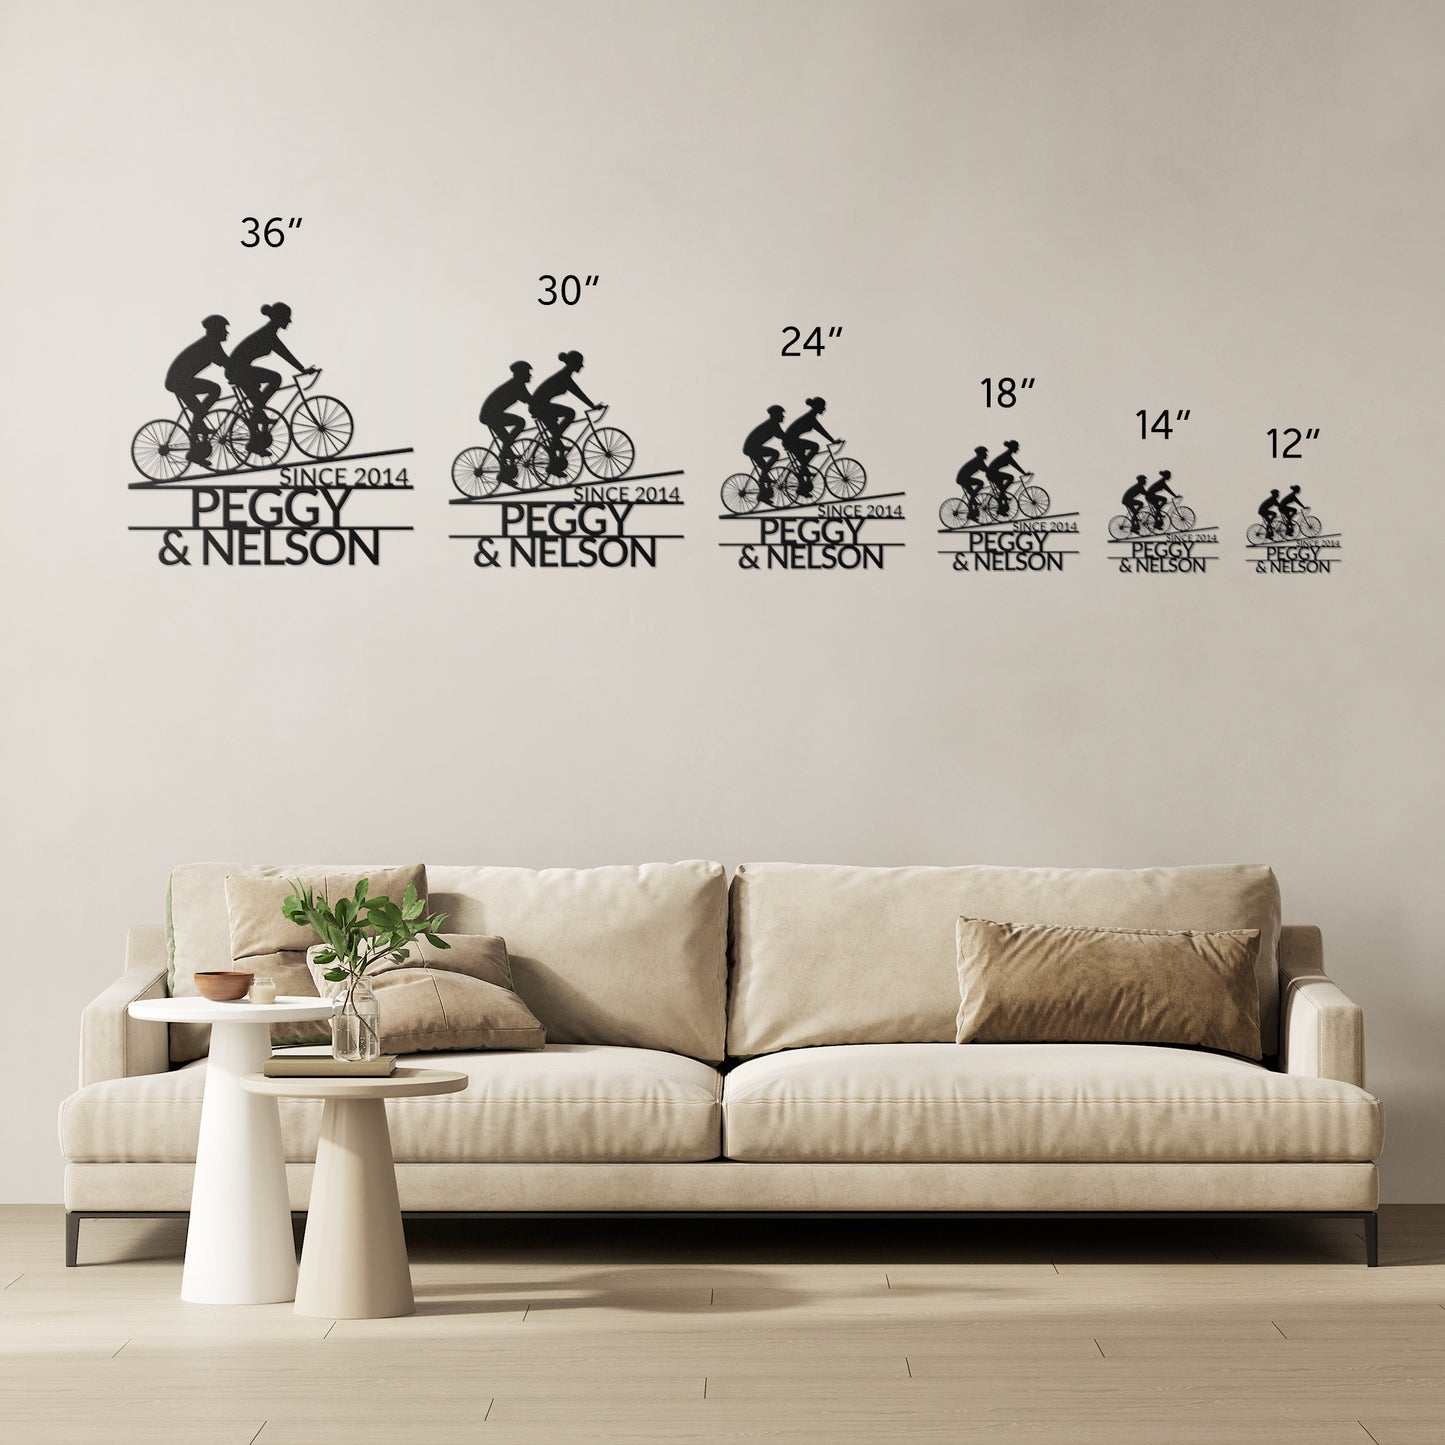 A teelaunch Personalized Couple Cycling Uphill Metal Wall Art Sign for couples who love to cycle together. It can be engraved with names and year established.